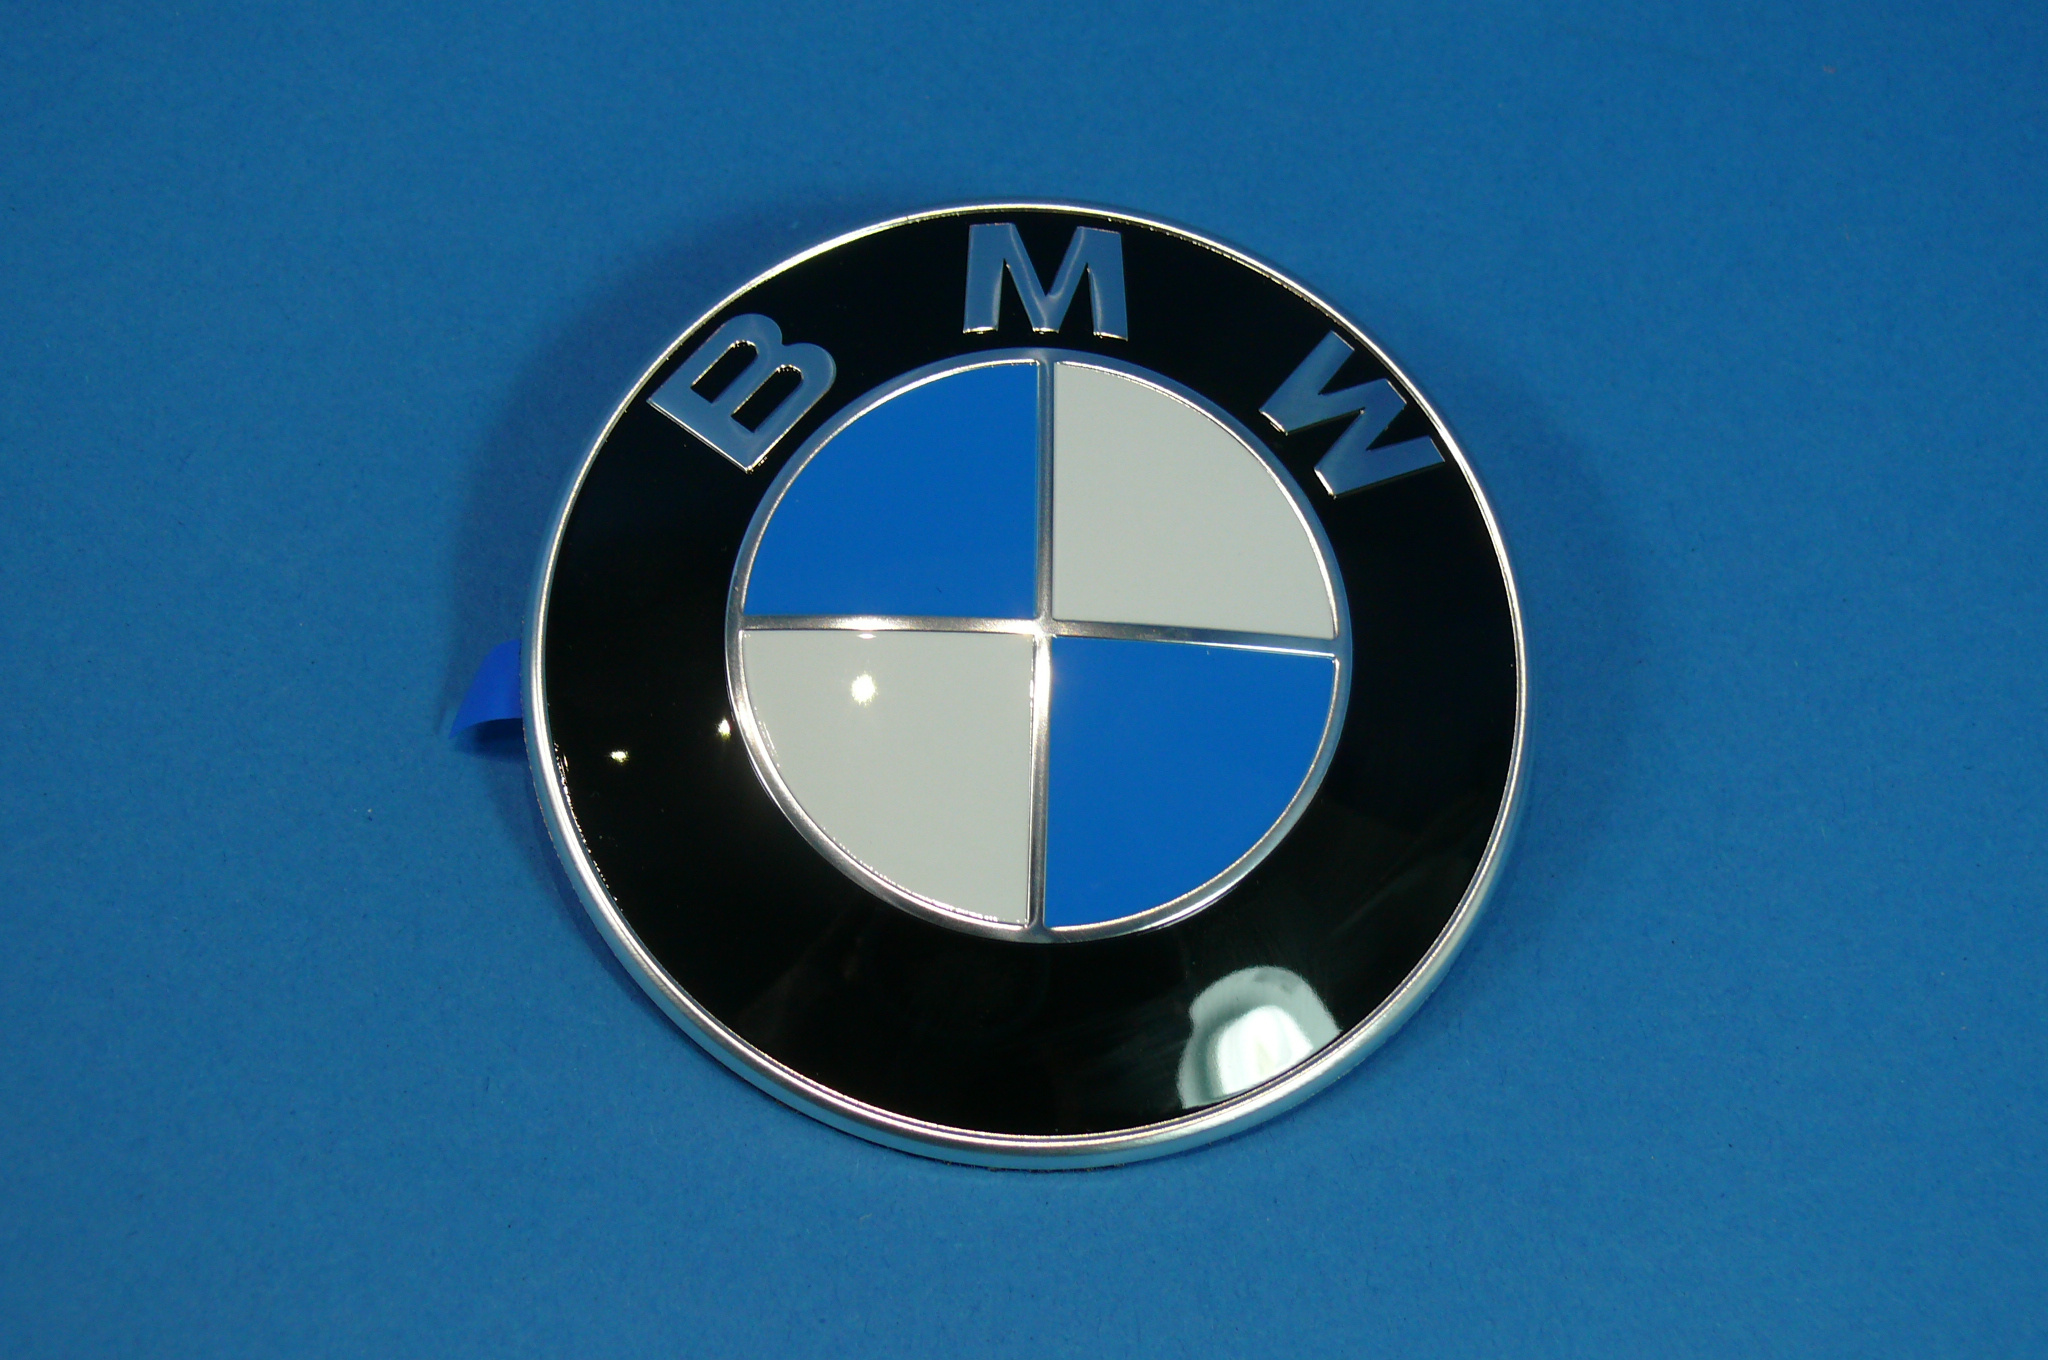 Blue Steering Wheel Logo Emblem Ring Cover For BMW 1 3 4 5 7 Series X1 X3  X5 X6